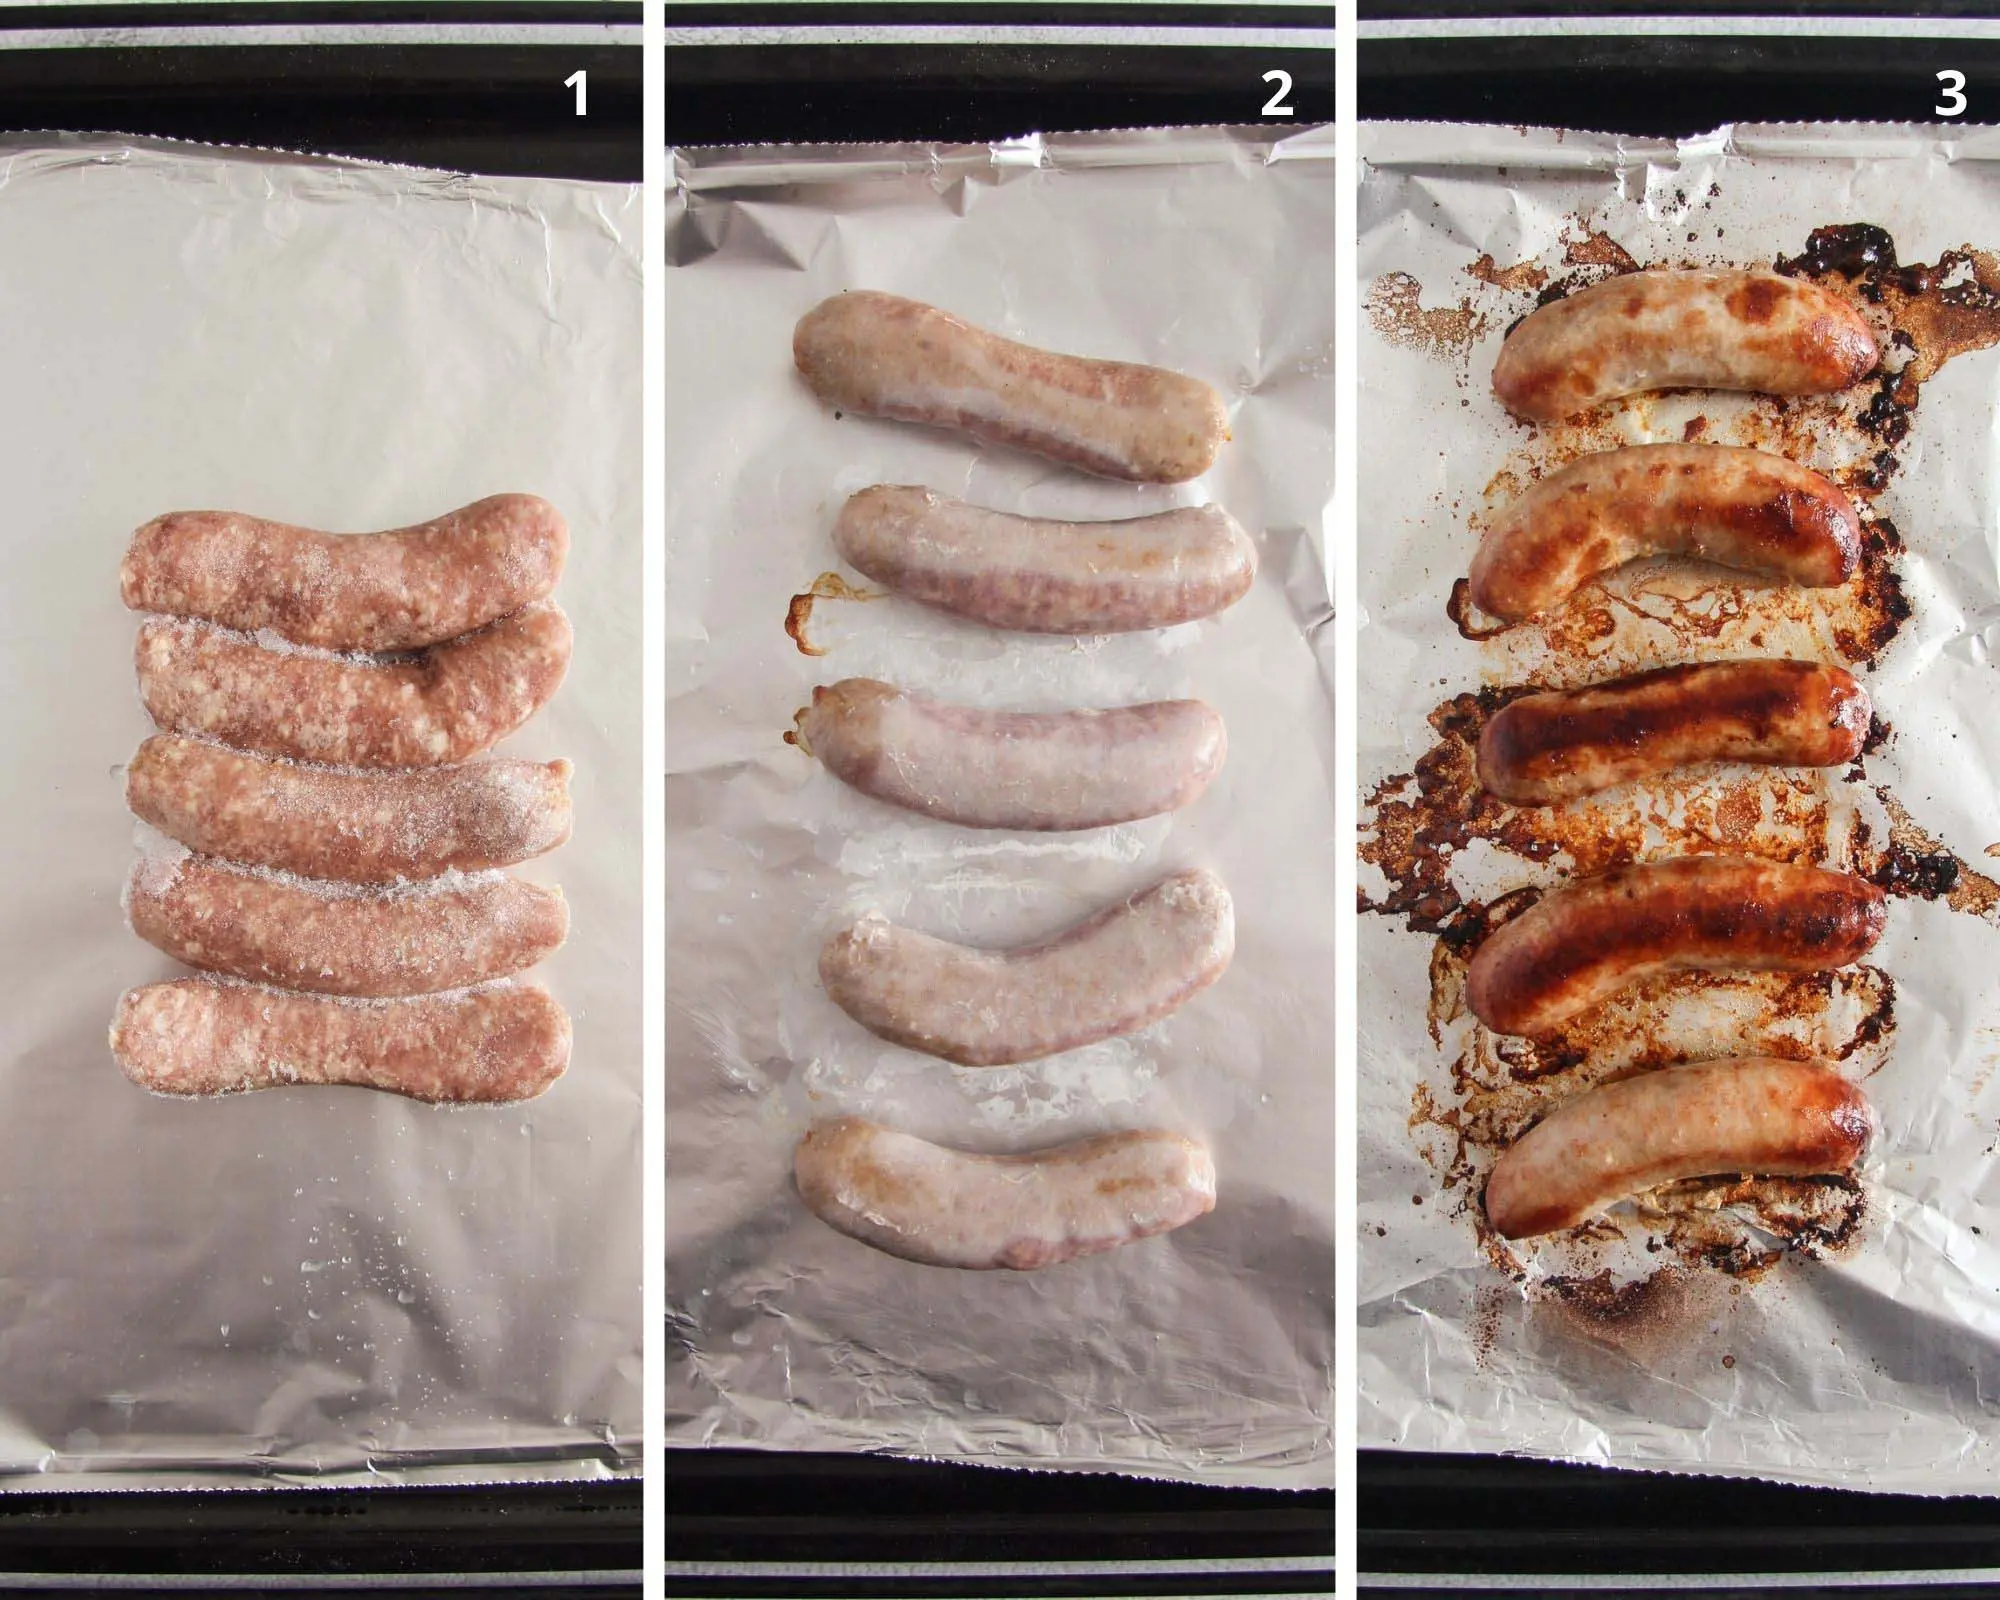 how to cook frozen smoked sausage - How do you heat up fully cooked frozen sausage